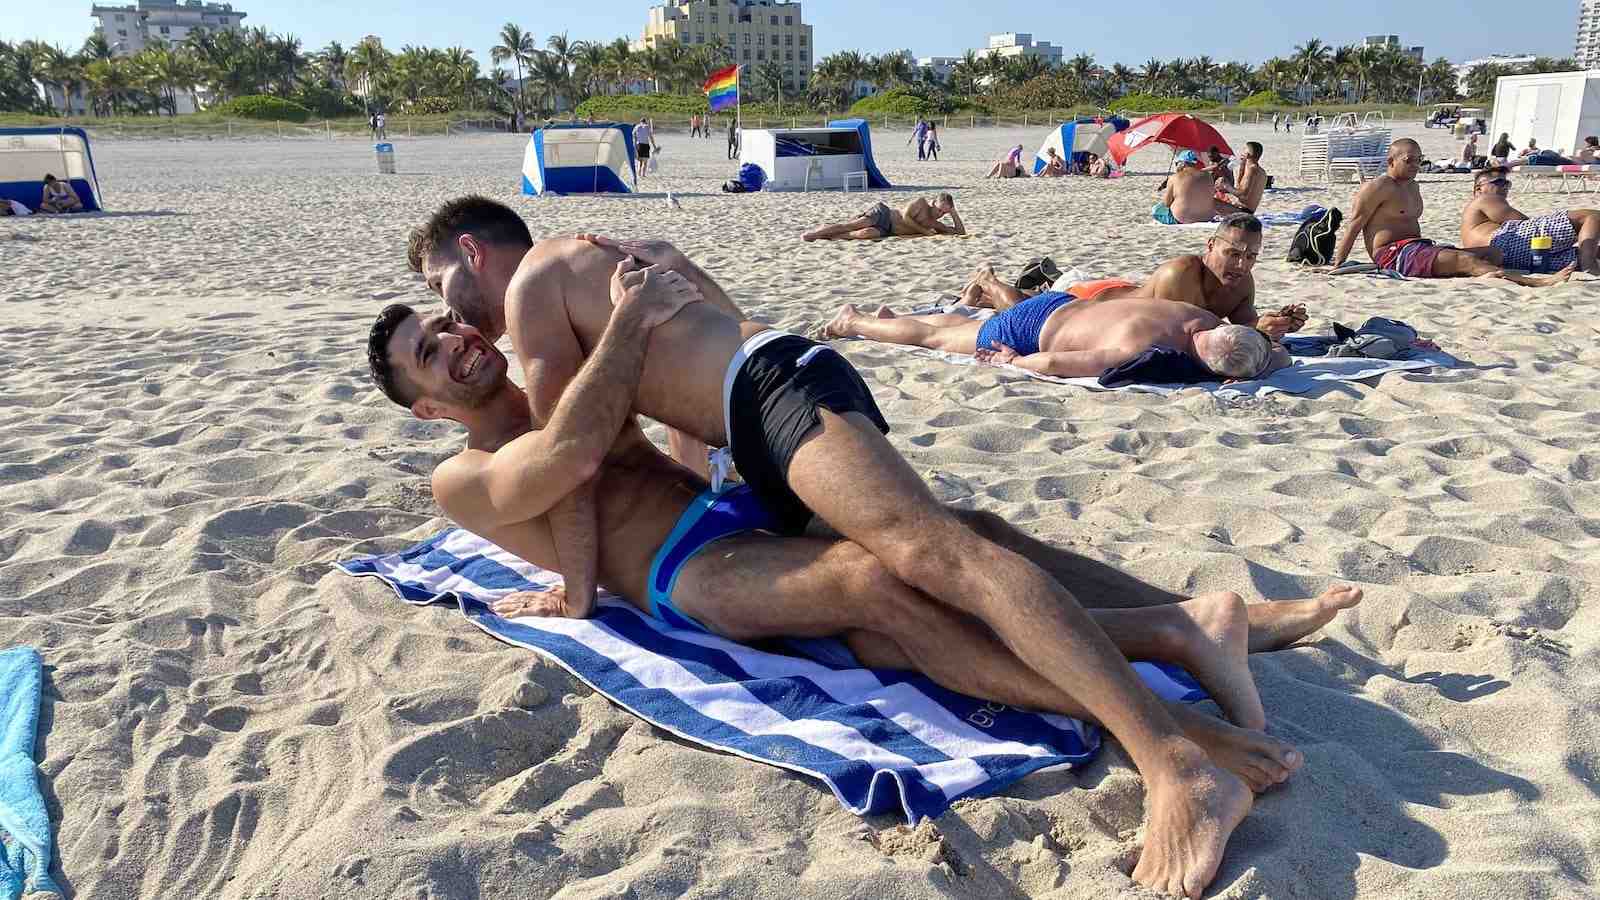 We personally think 12th Street is the best gay beach in Miami